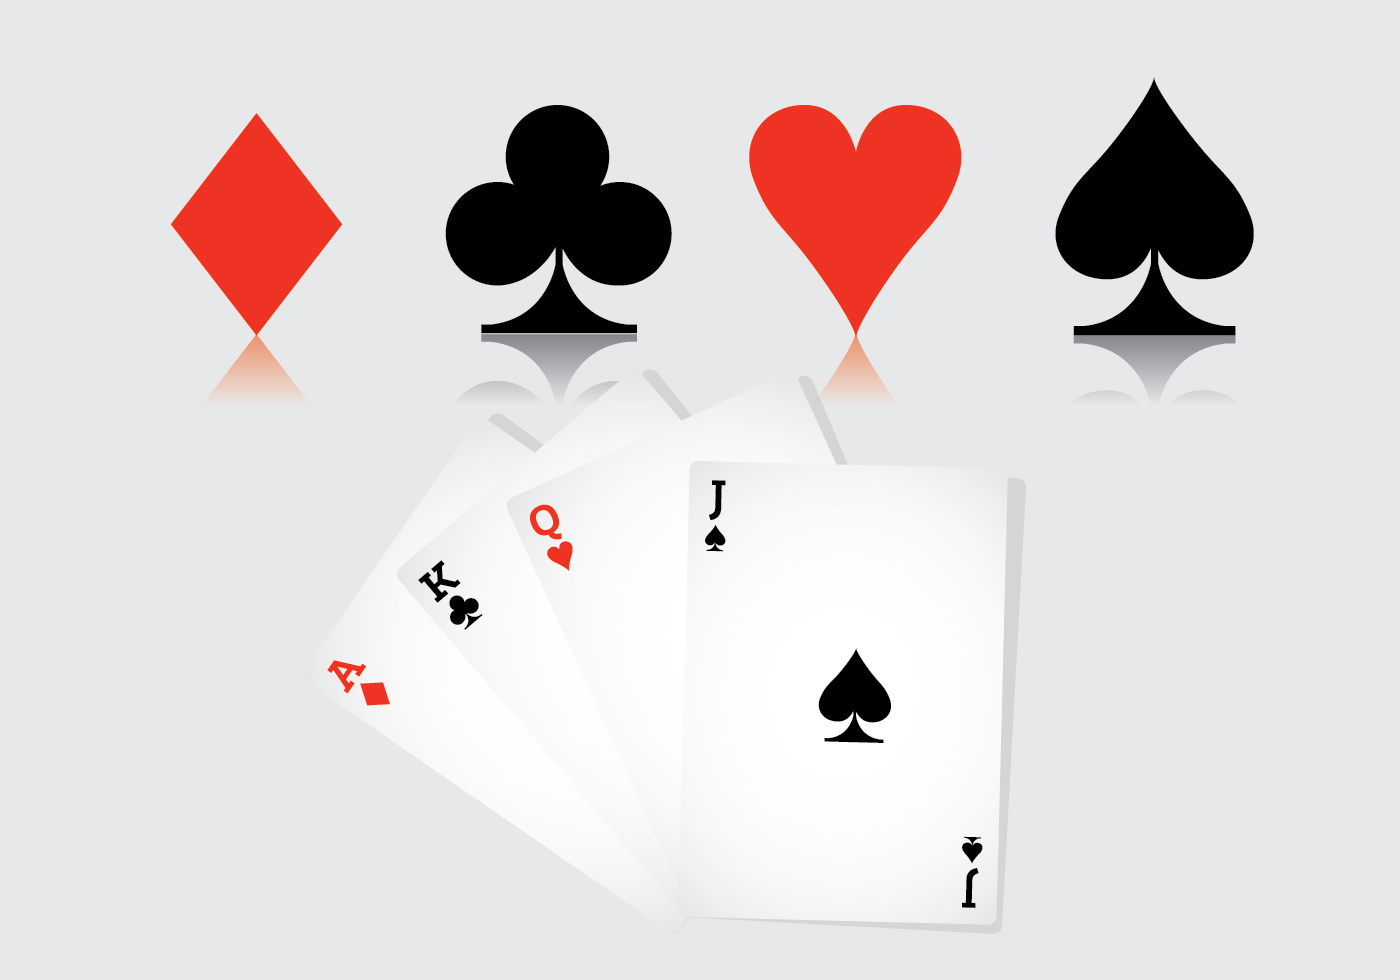 Playing Card Vector - Download Free Vector Art, Stock Graphics & Images